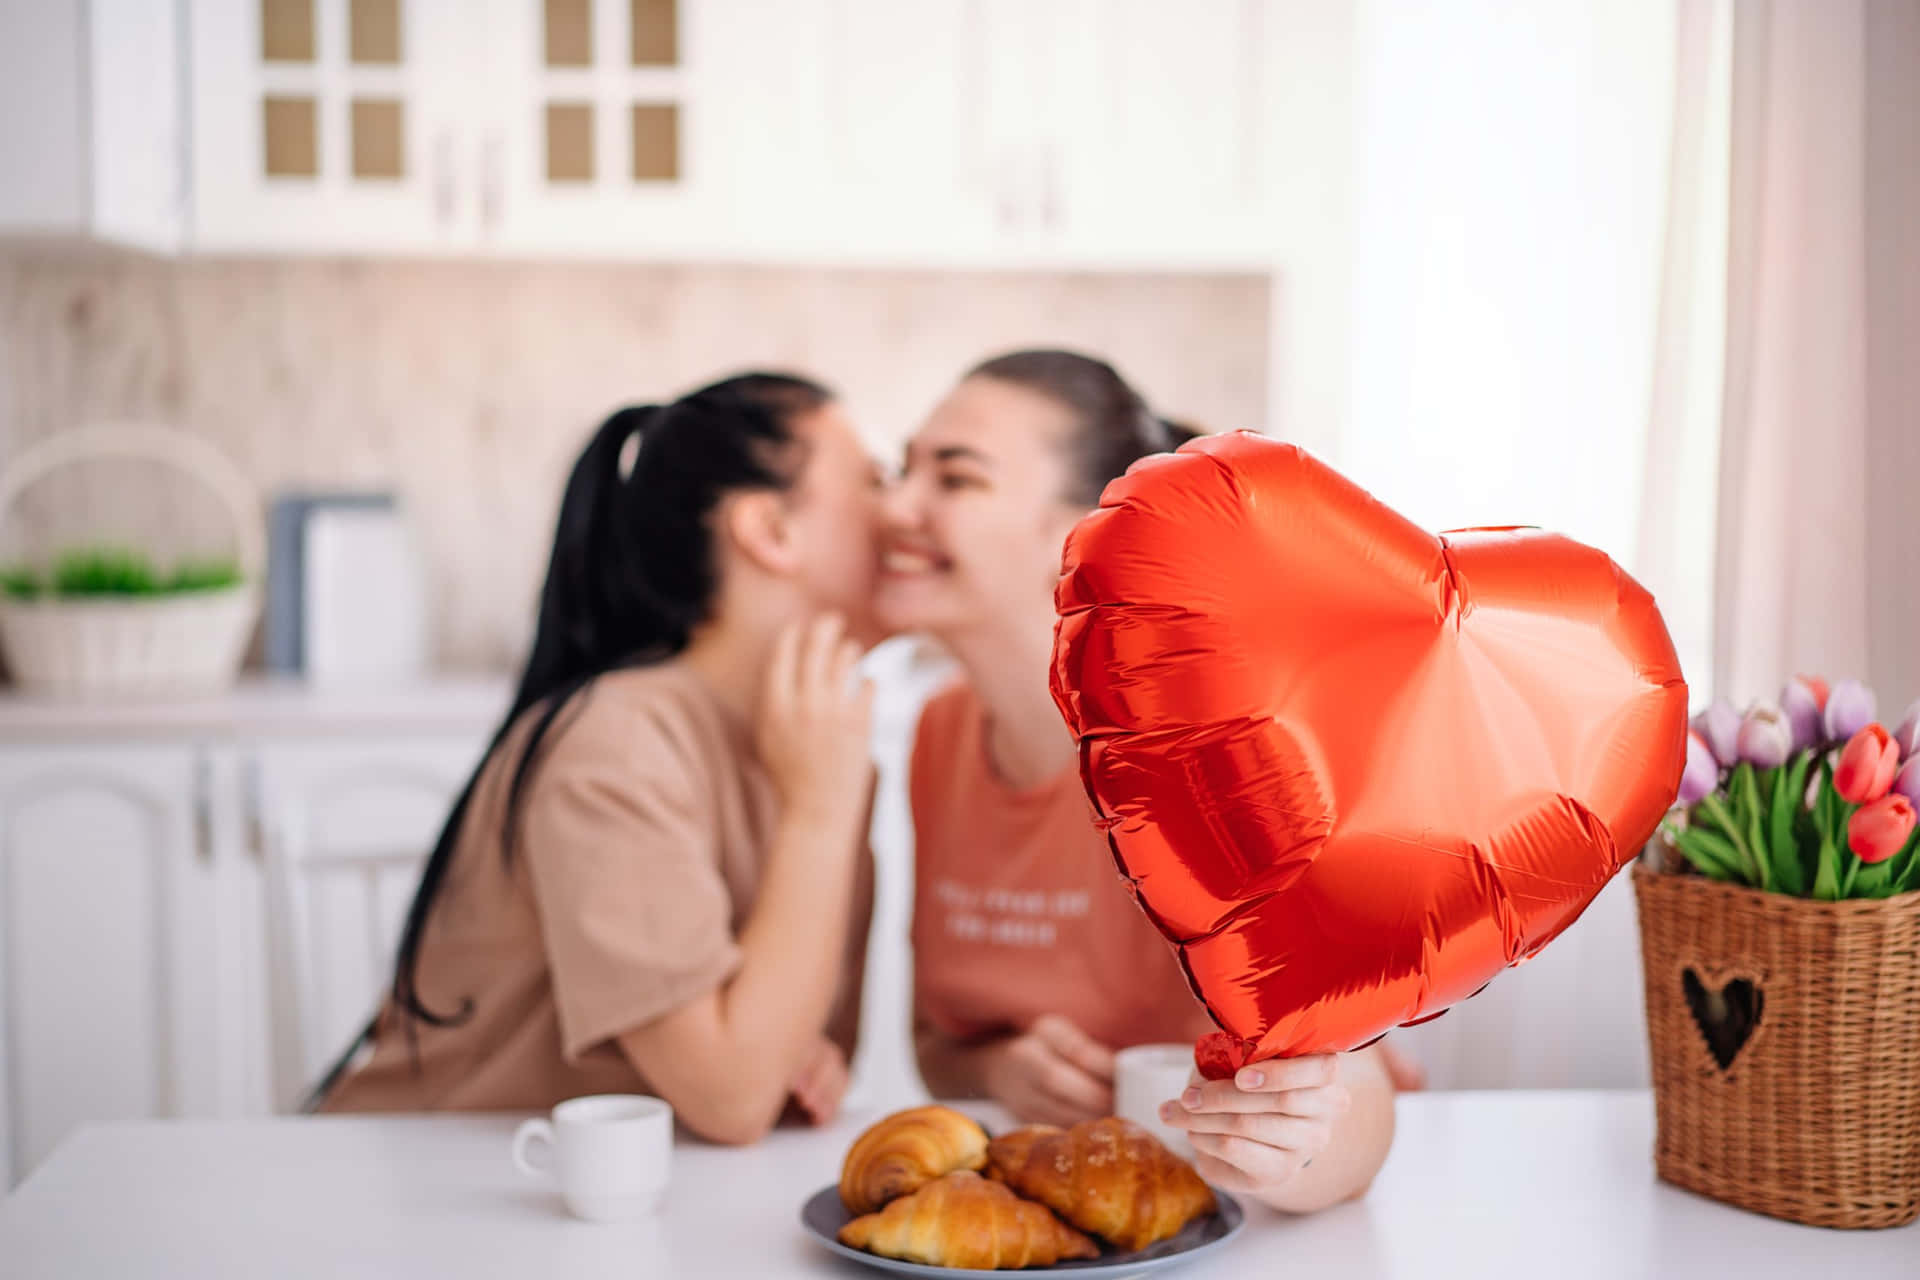 Two Girls With Valentine's Day Balloon Pictures 2560 x 1707 Picture